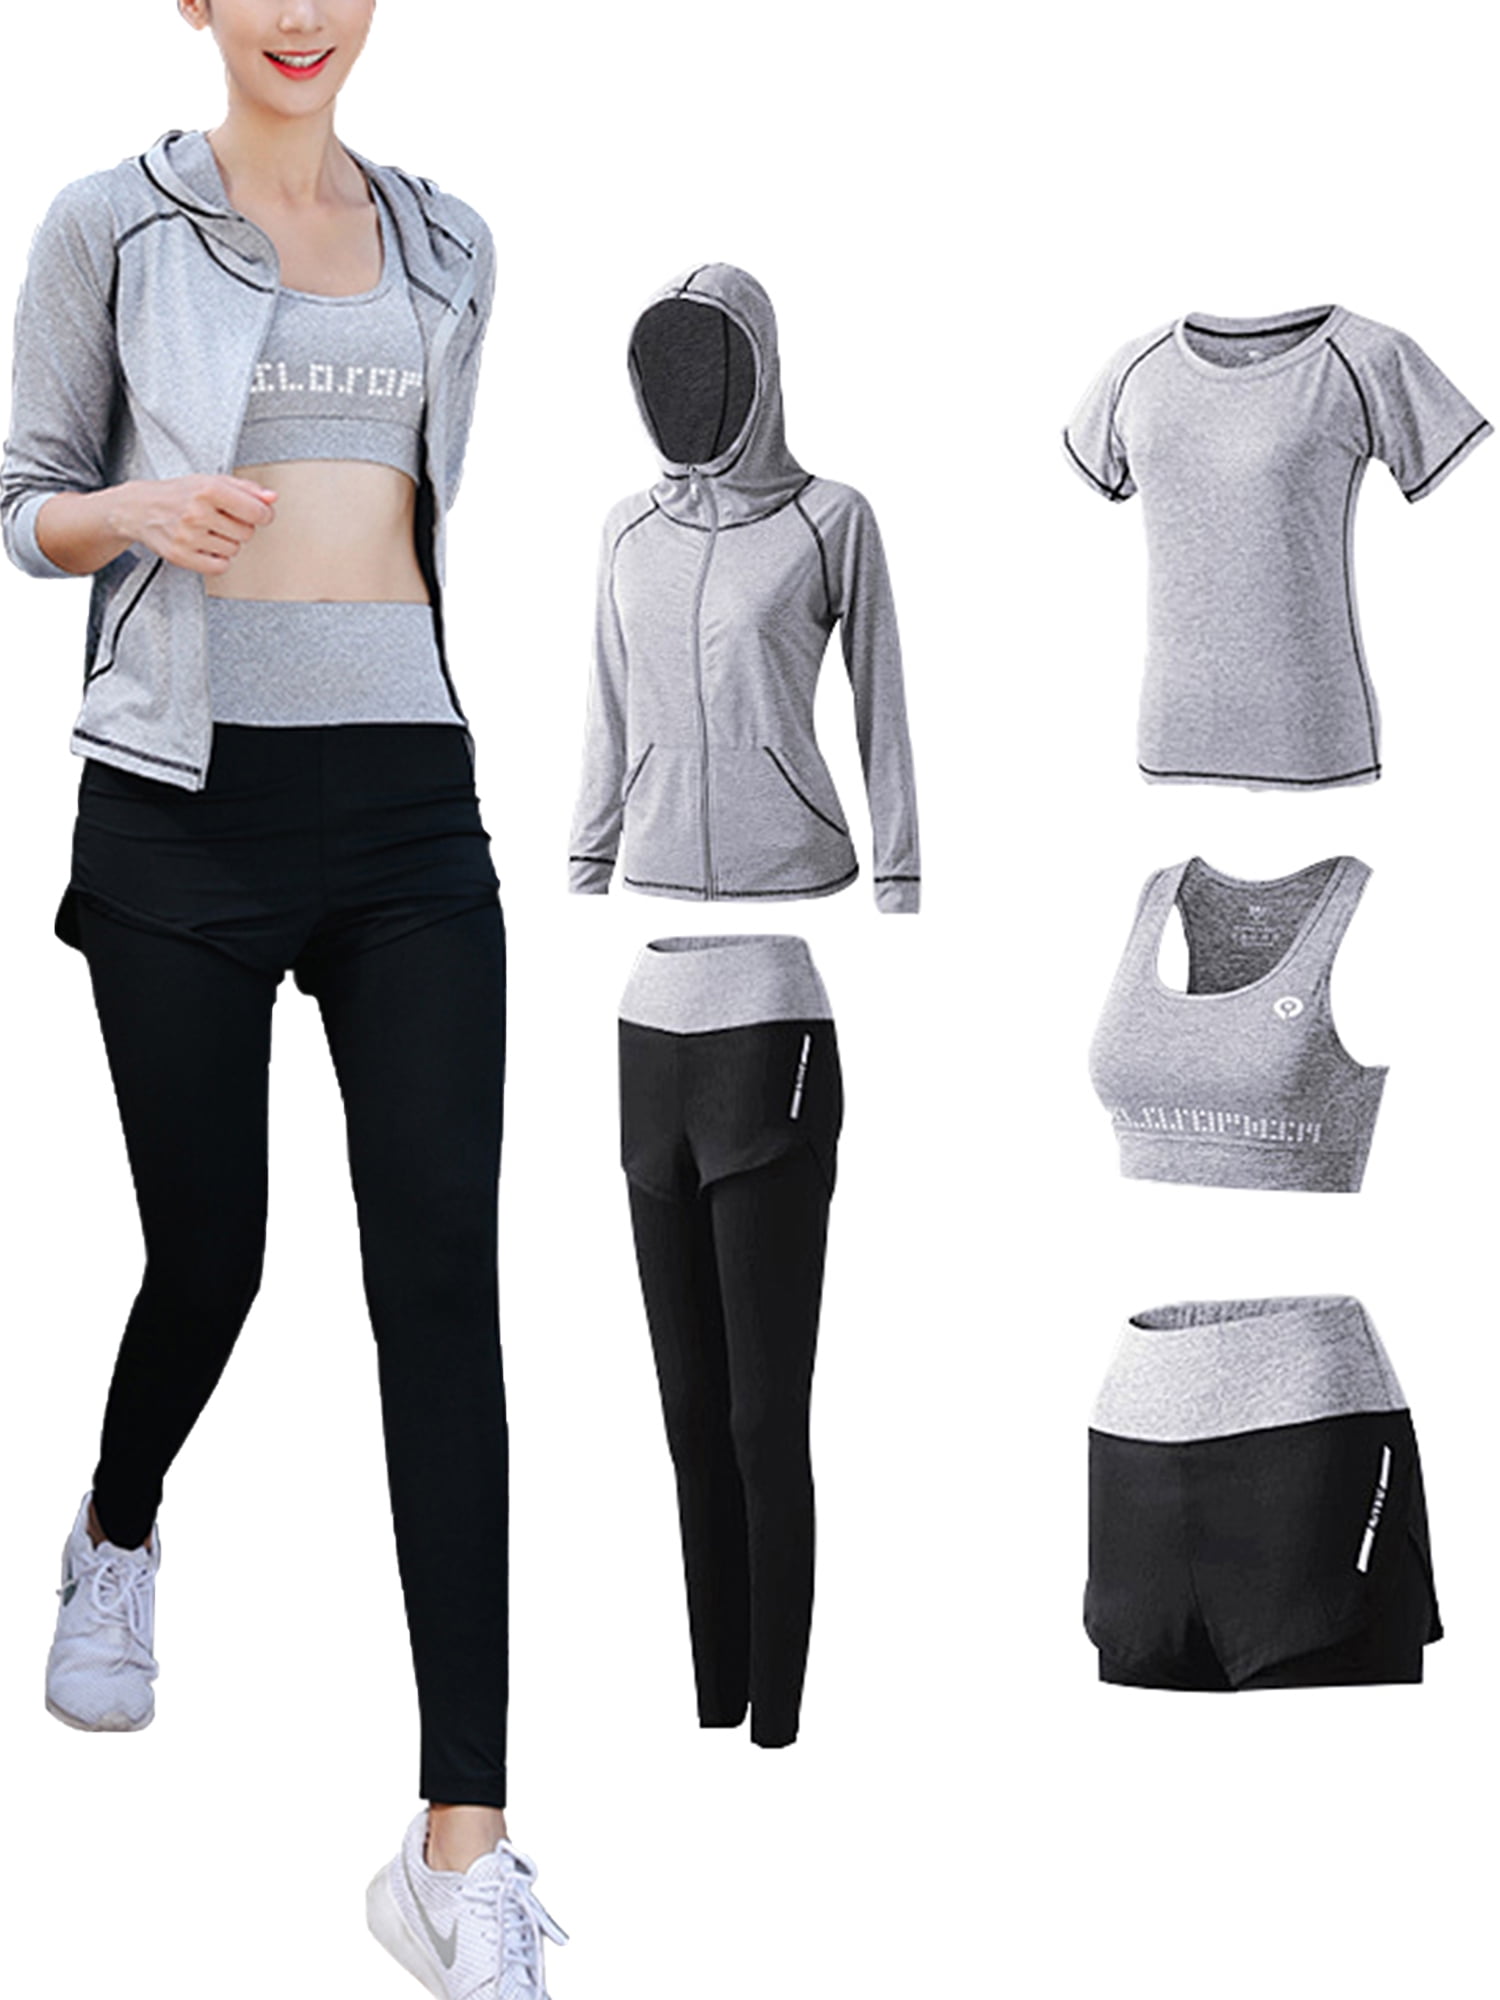 Haby Womens Sportswear Set Gym Outfit V-Neck Top Leggings Pants